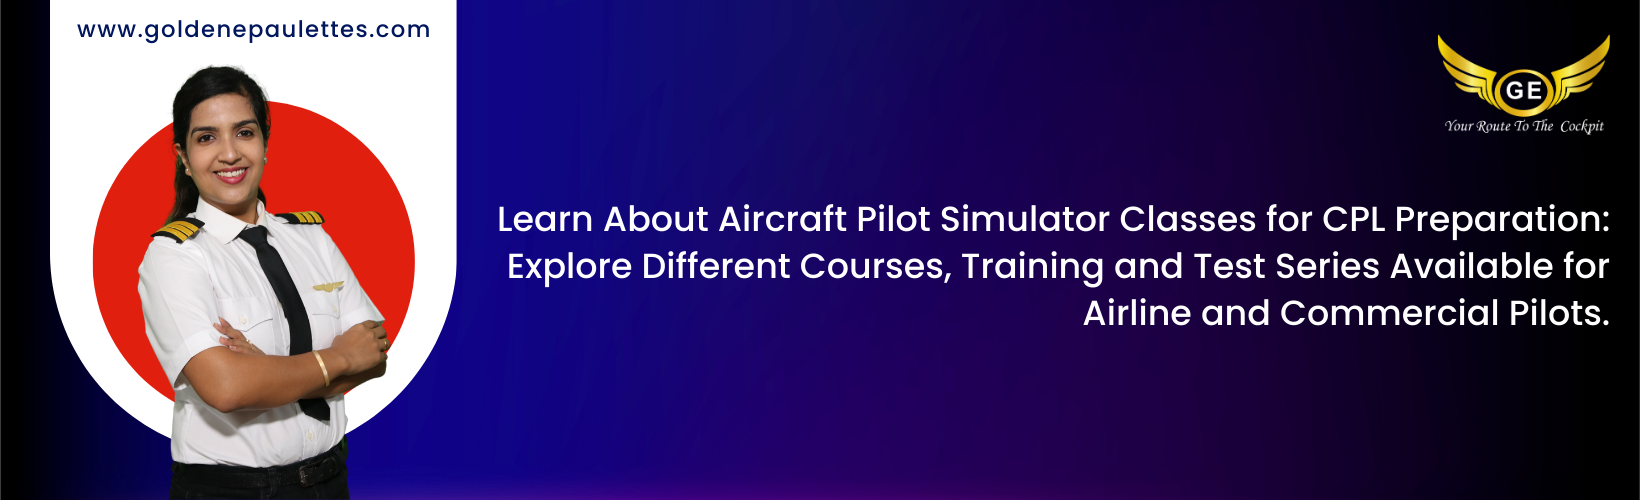 Safety in Simulator Classes